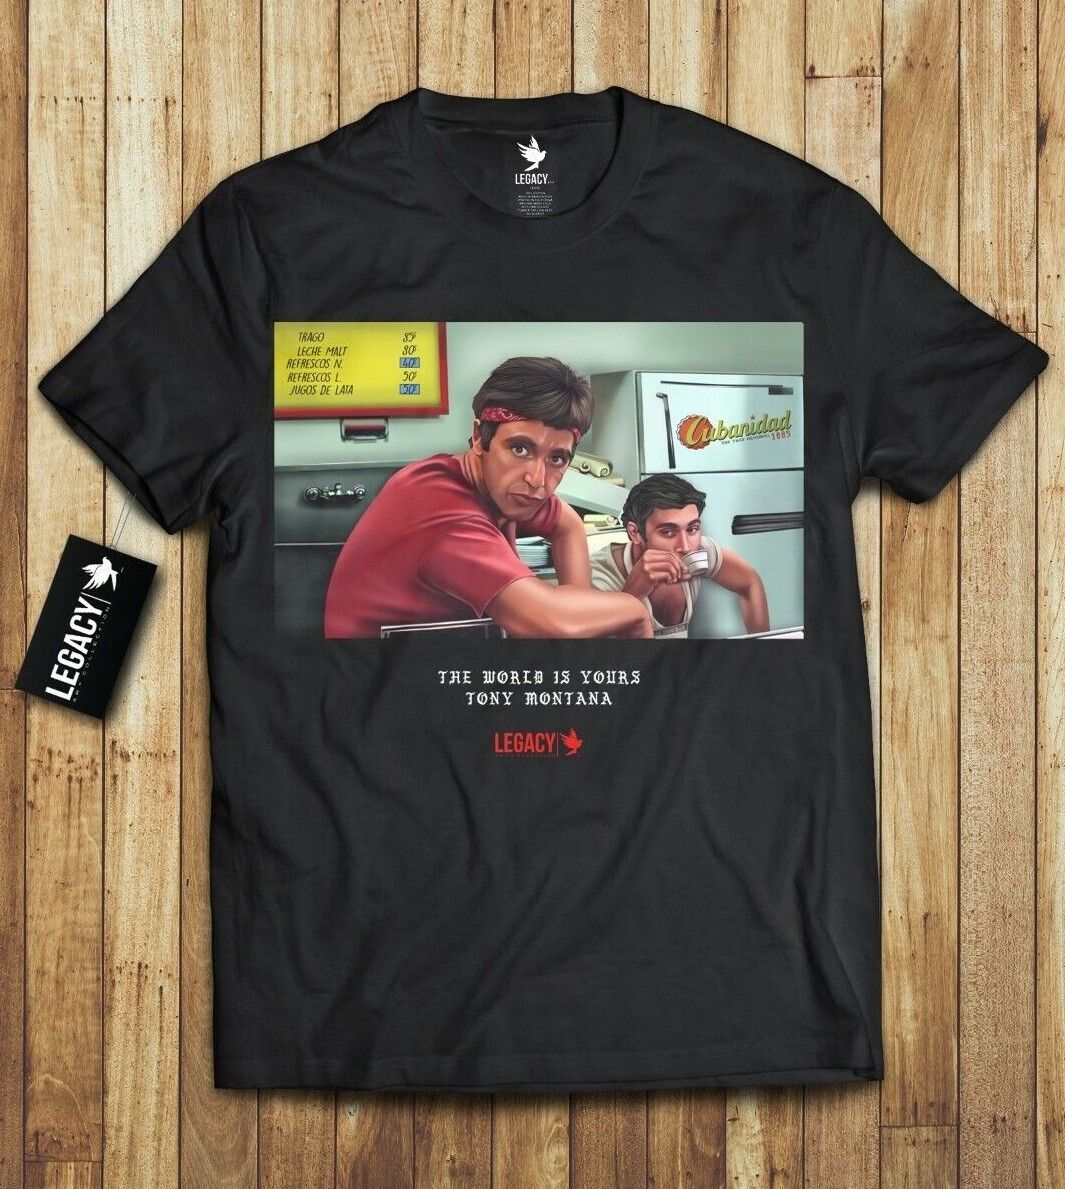 Scarface The World Is Yours Shirt